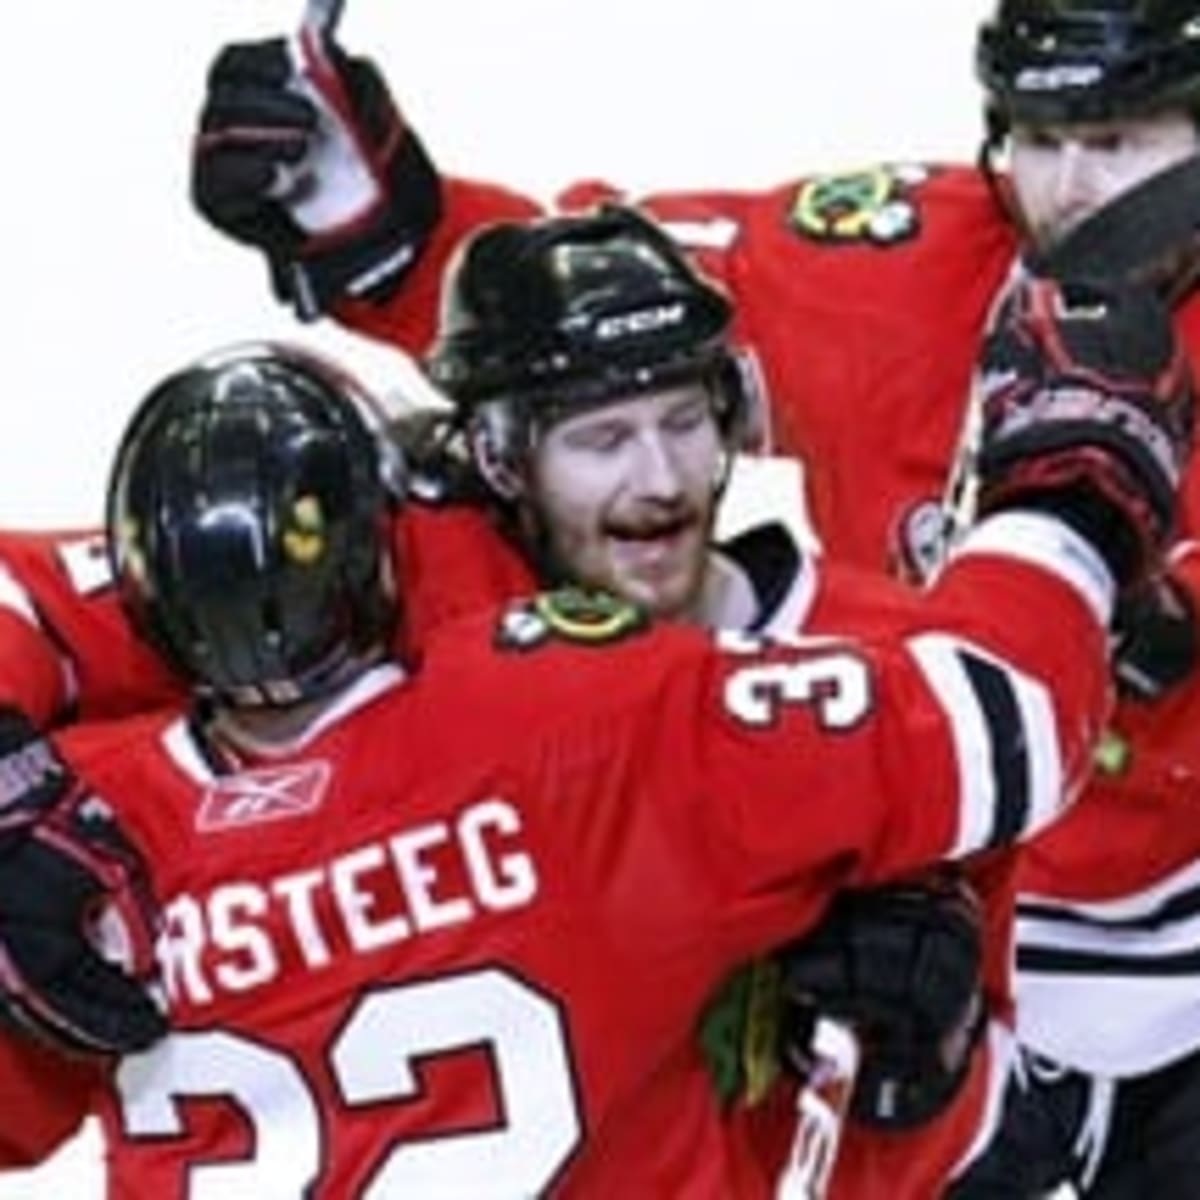 Trip to Stanley Cup finals helps Duncan Keith cope with loss of 7 teeth